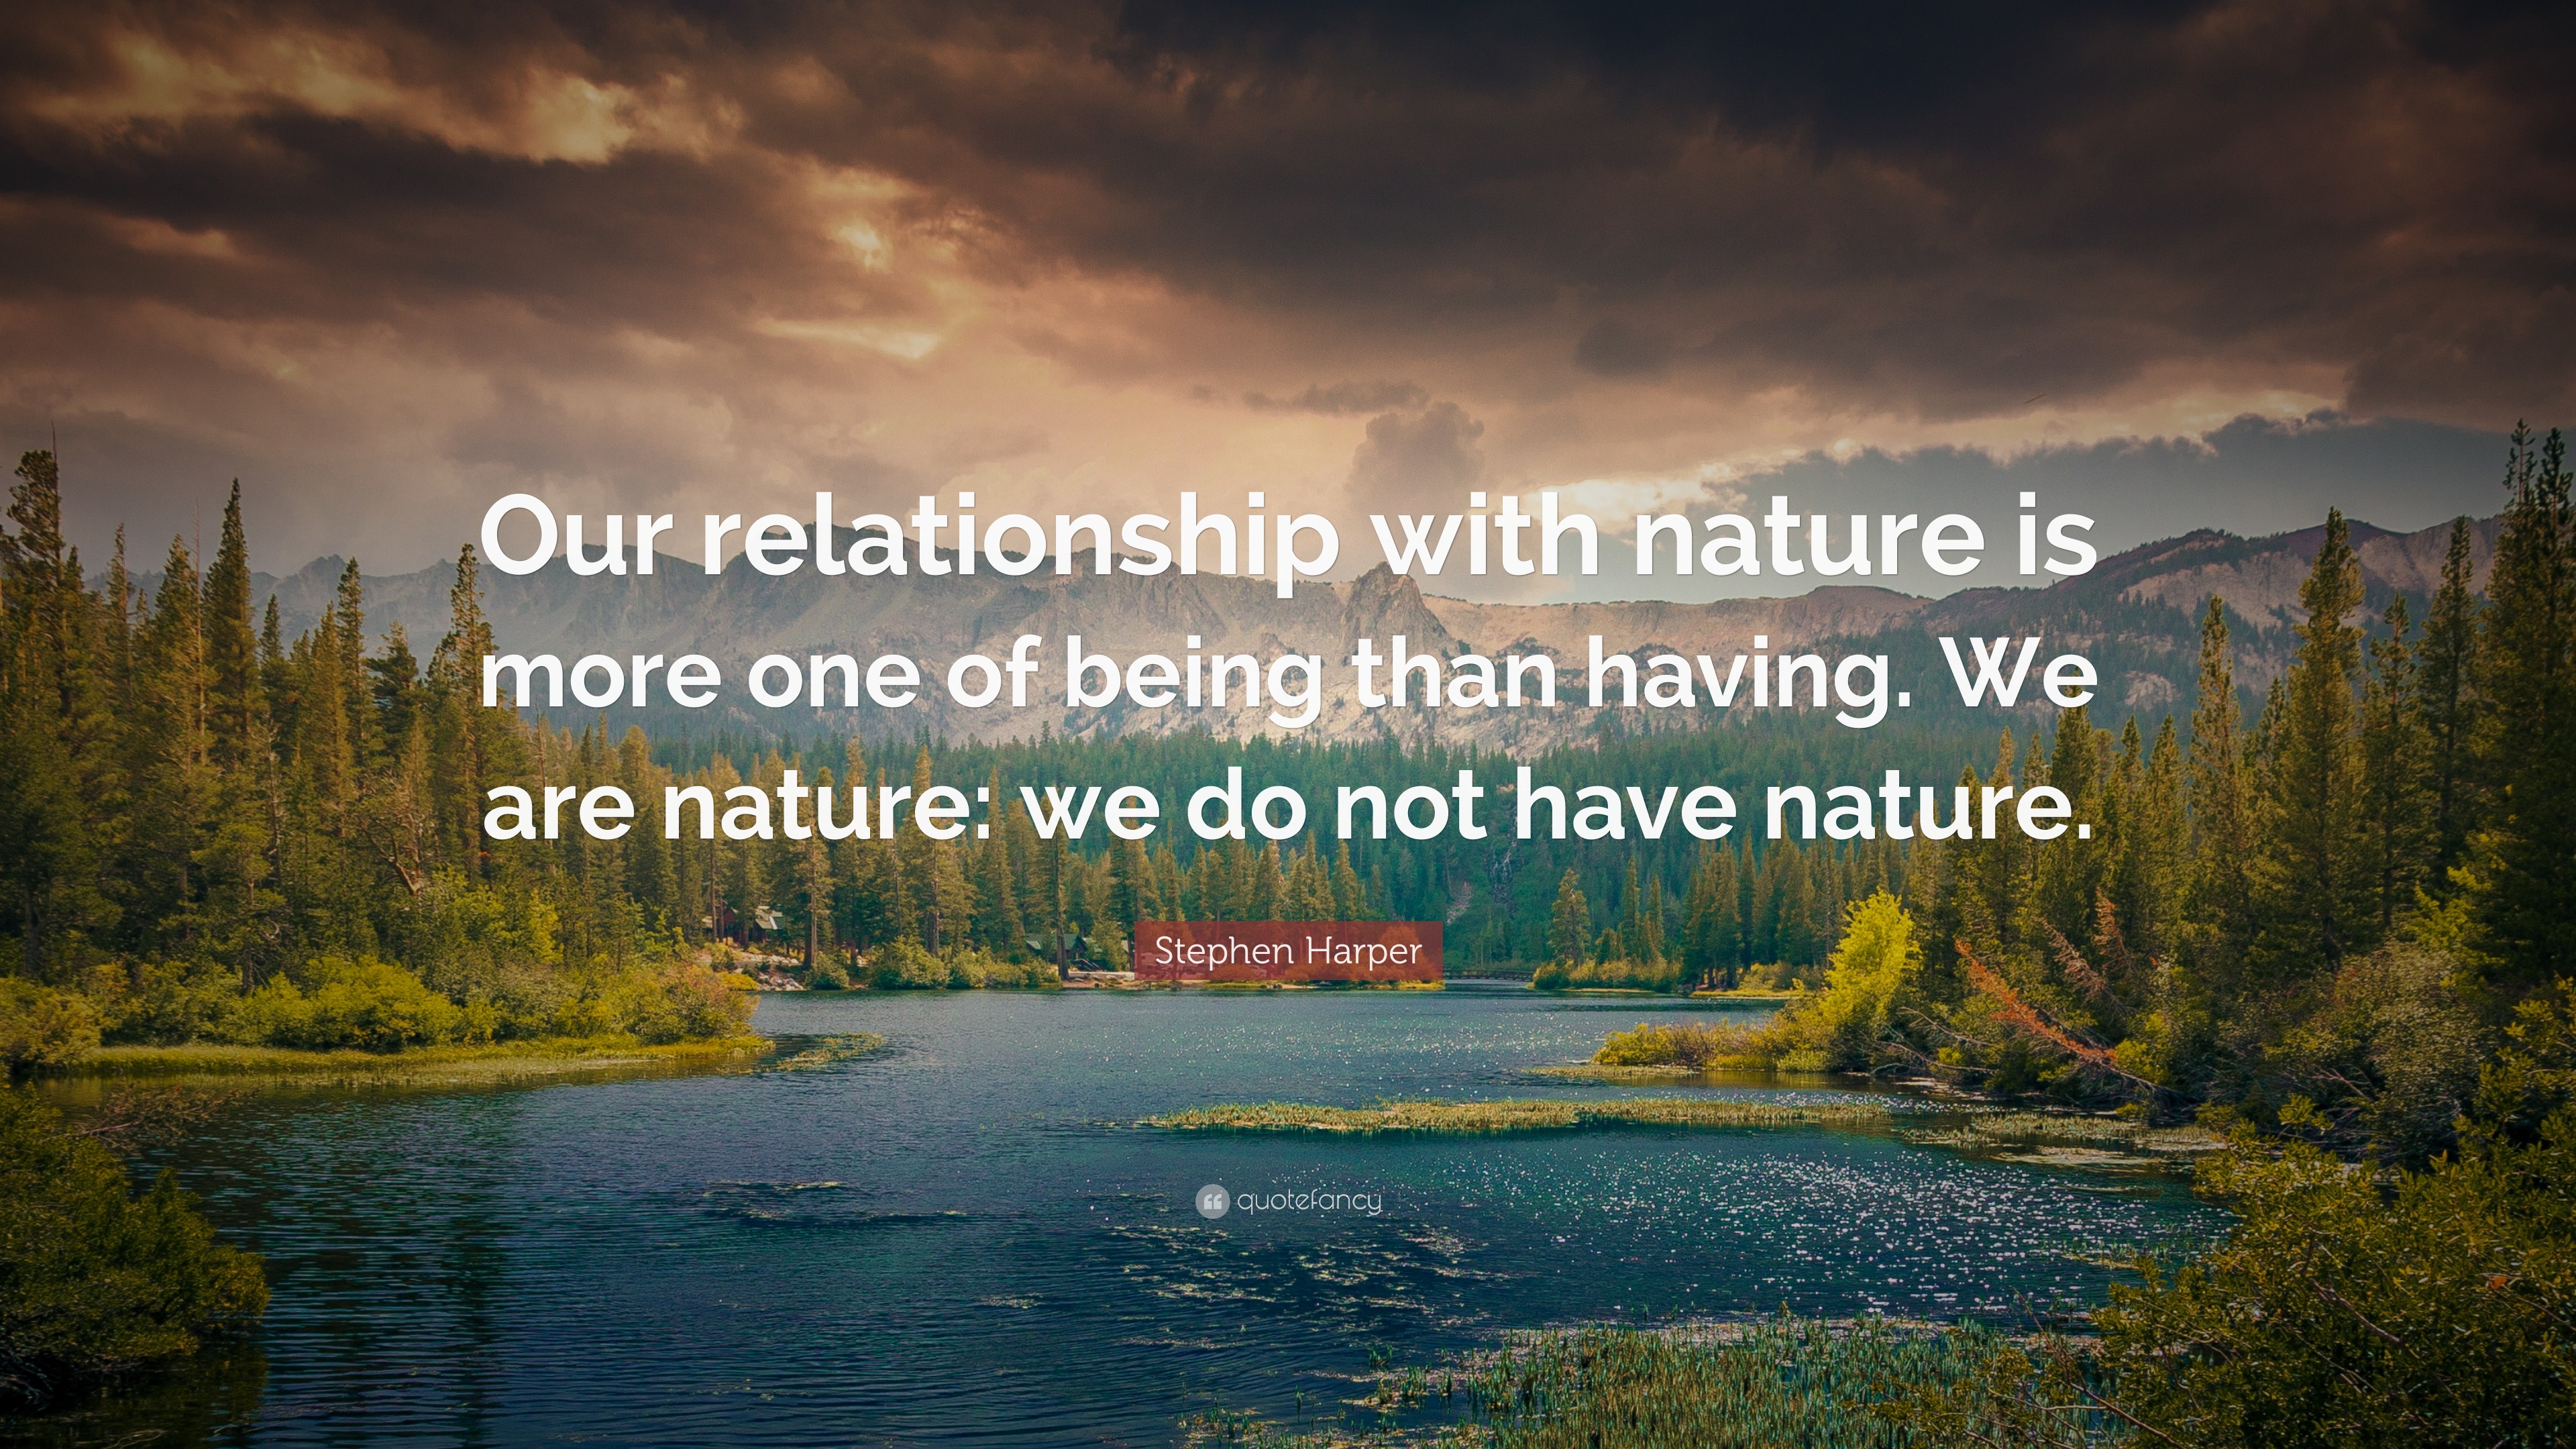 5507439 Stephen Harper Quote Our relationship with nature is more one of